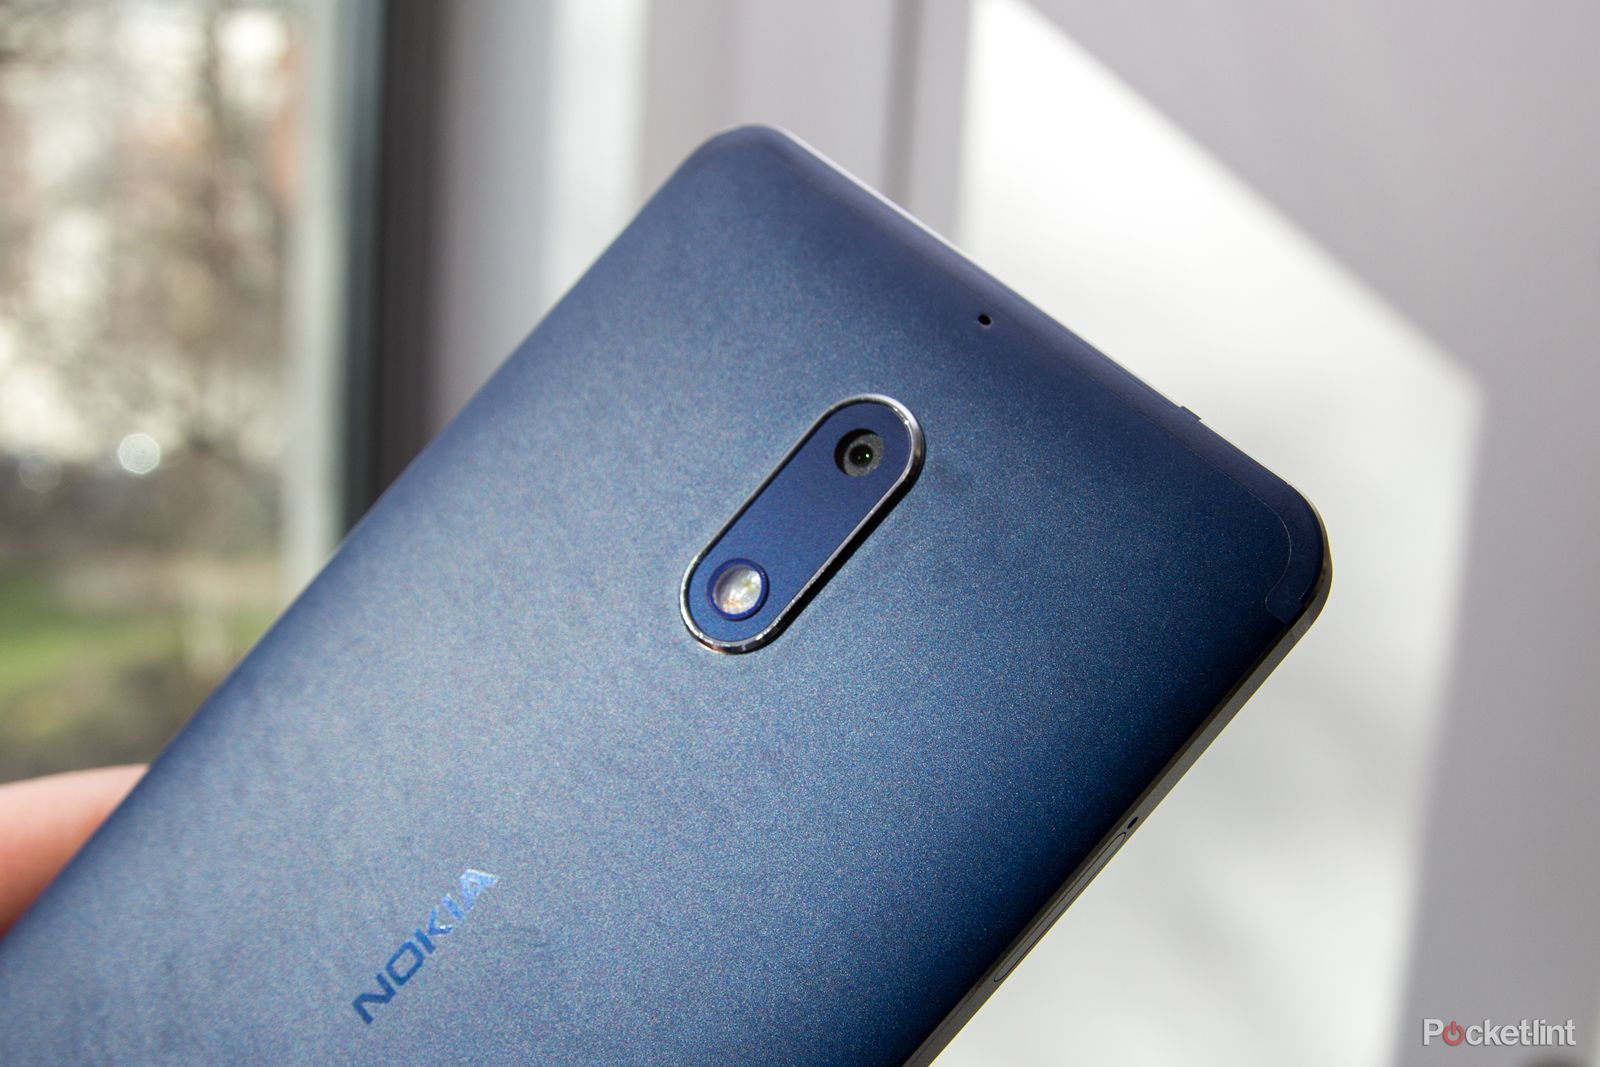 nokia 8 tipped for june flagship said to come with snapdragon 835 image 1